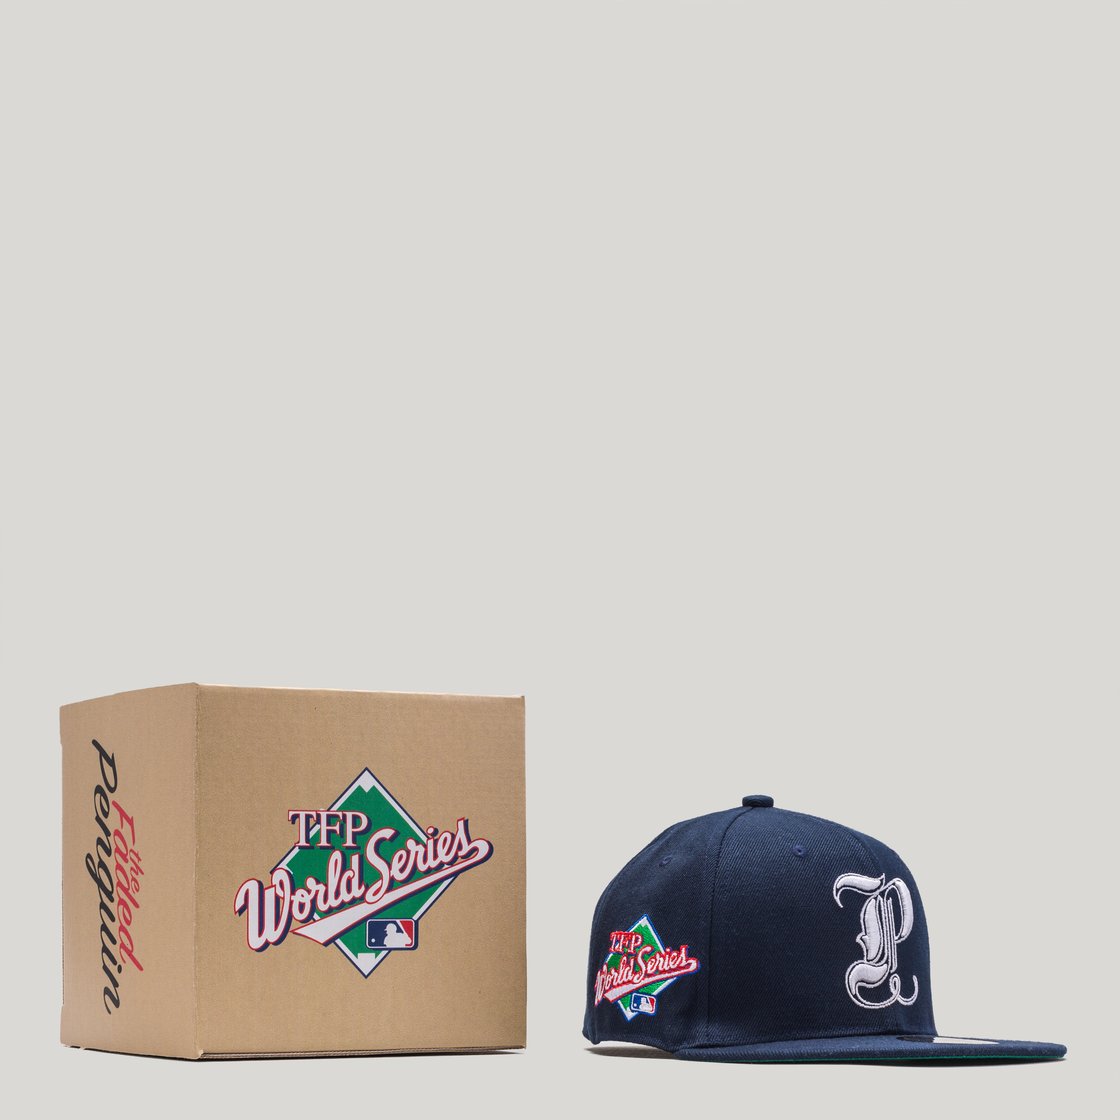 Image of theFADEDpenguin™ x New Era "World Series" Fitted (Navy)